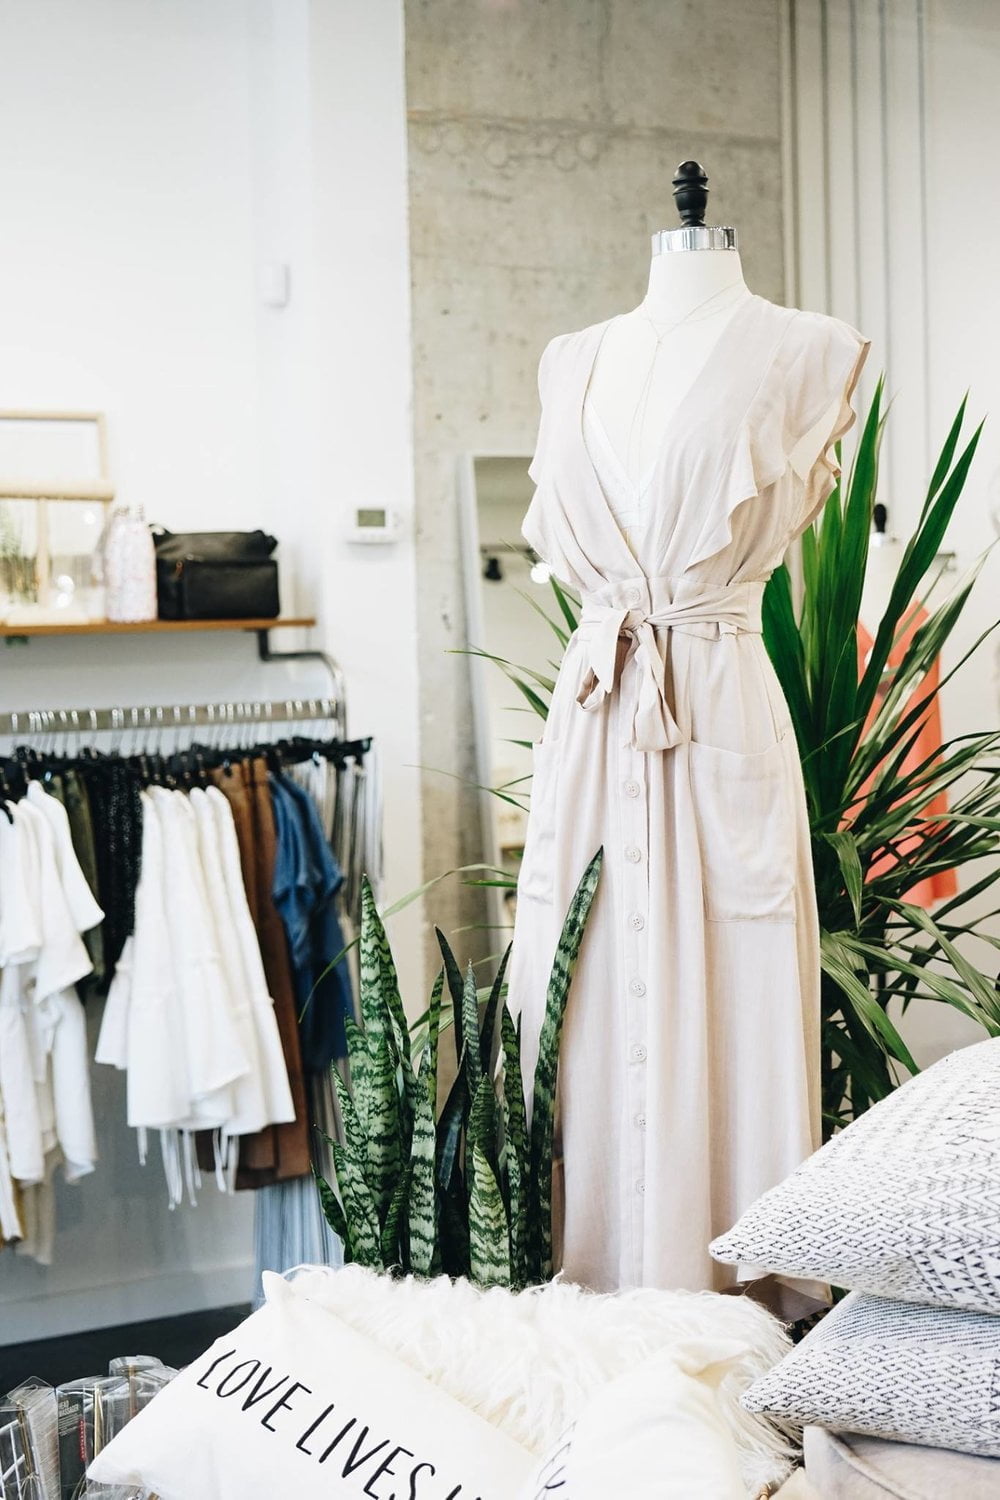 Vancouver-Based Women’s Retailer ‘The Latest Scoop’ Expands to Toronto